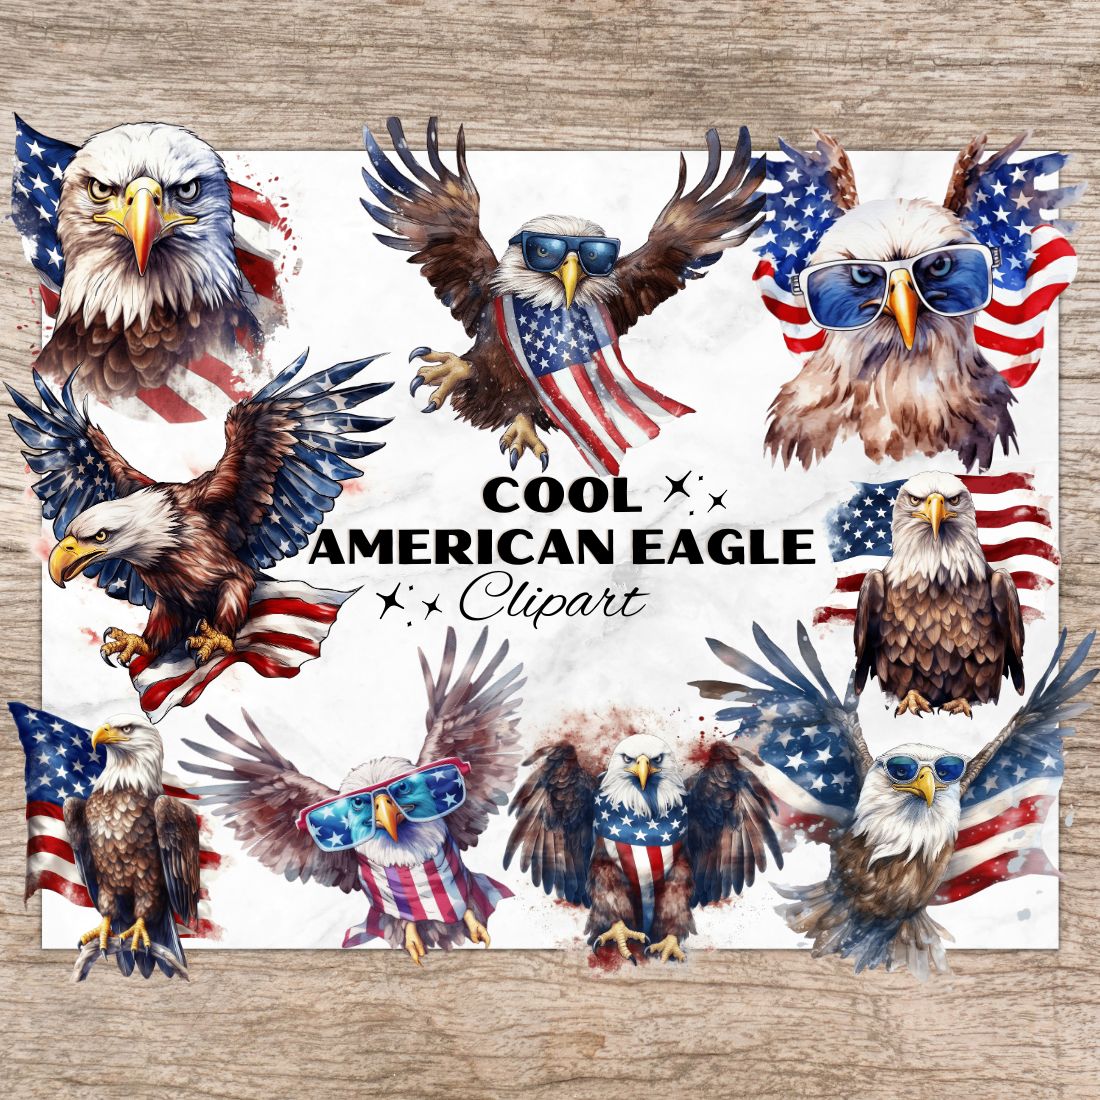 Cool American Eagle cover image.